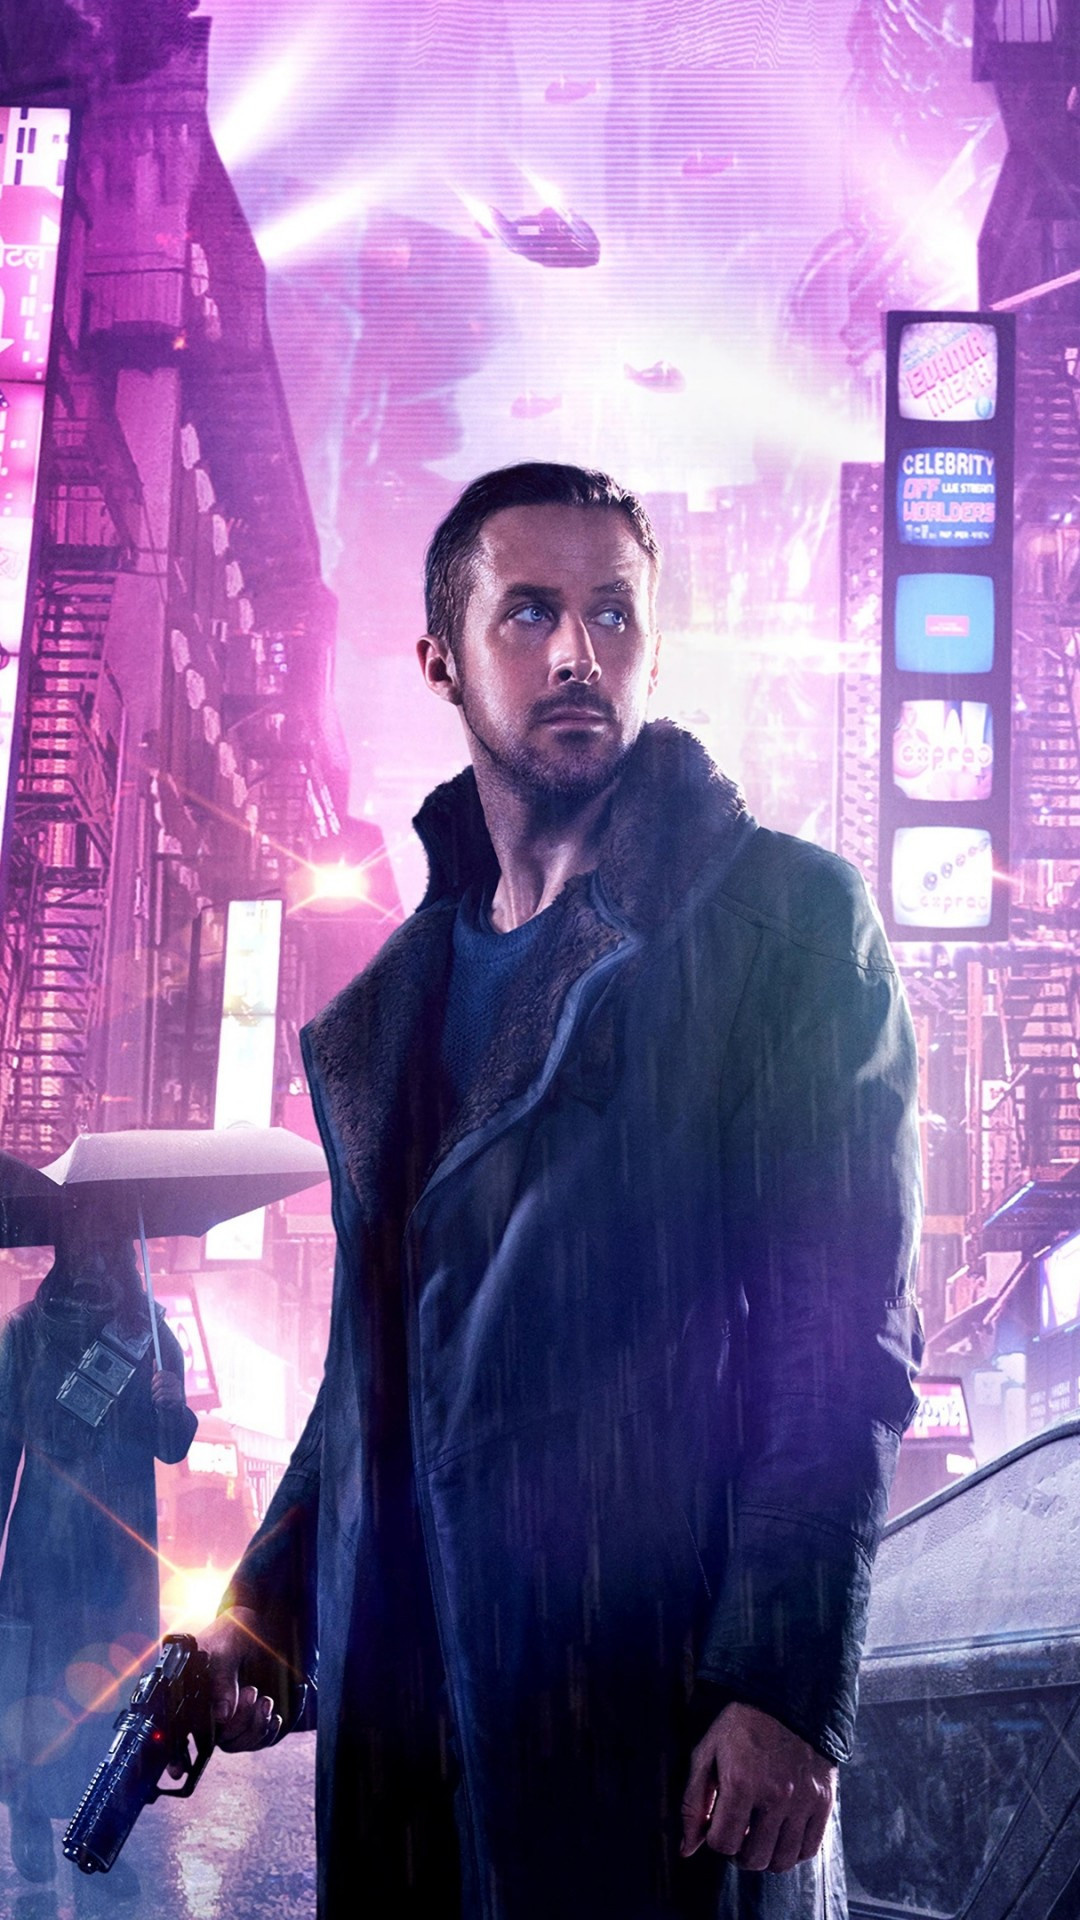 Download Blade Runner 2049, Futuristic cityscape, iPhone wallpapers, Sony Xperia wallpapers, 1080x1920 Full HD Handy